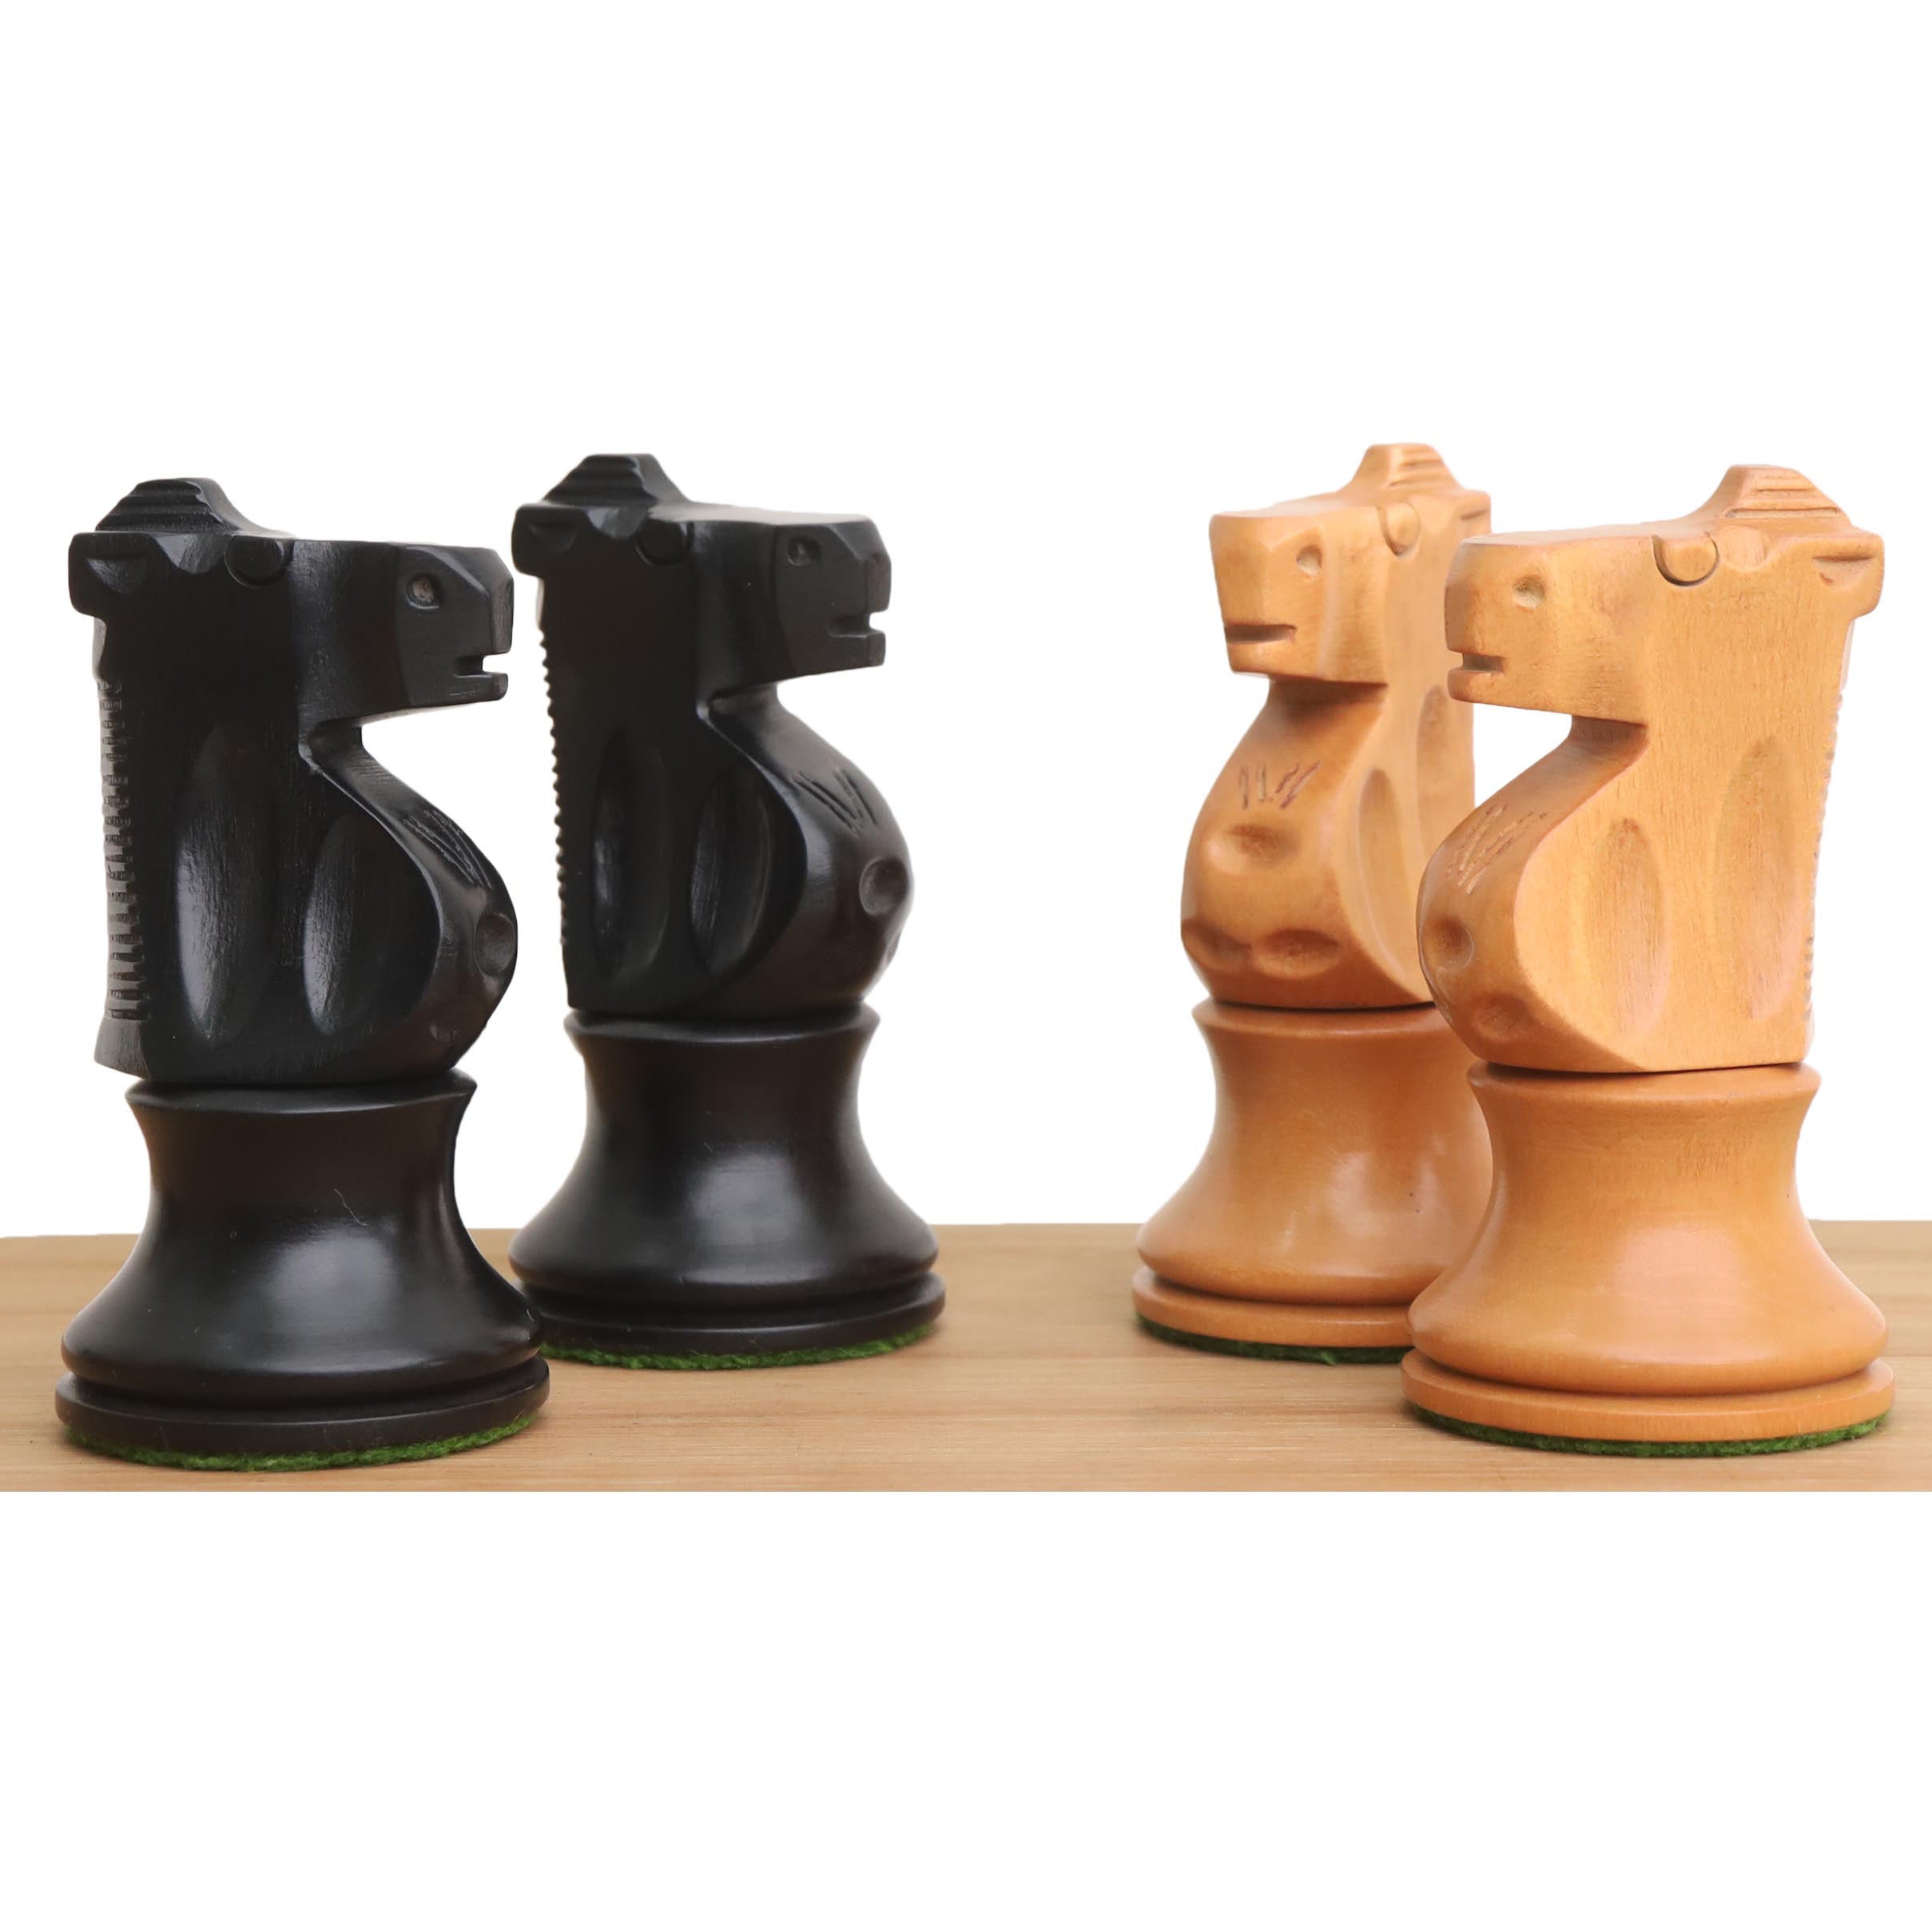 Improved French Lardy Chess Pieces Only set - Antiqued boxwood